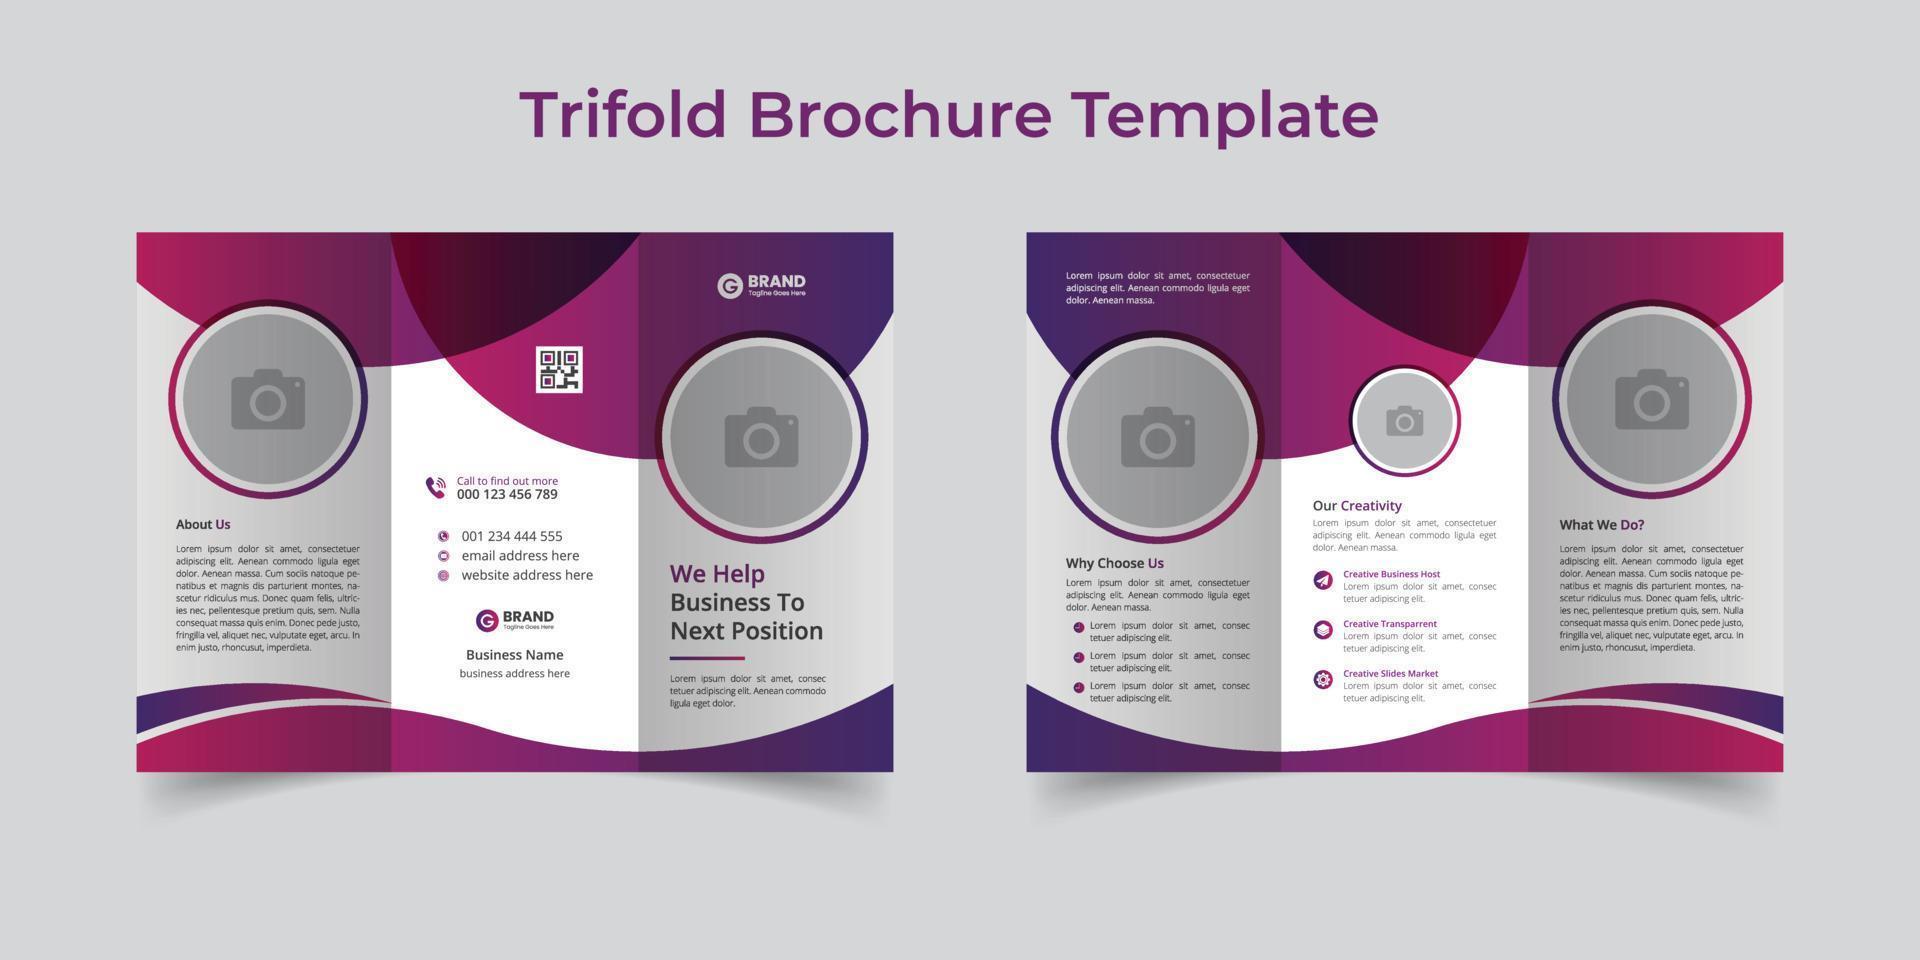 Corporate Trifold Brochure Design Template. Design Template Geometric shape used for business Trifold Brochure layout. Corporate Brochure, Business Brochure, A4 with Bleed, Print Ready vector